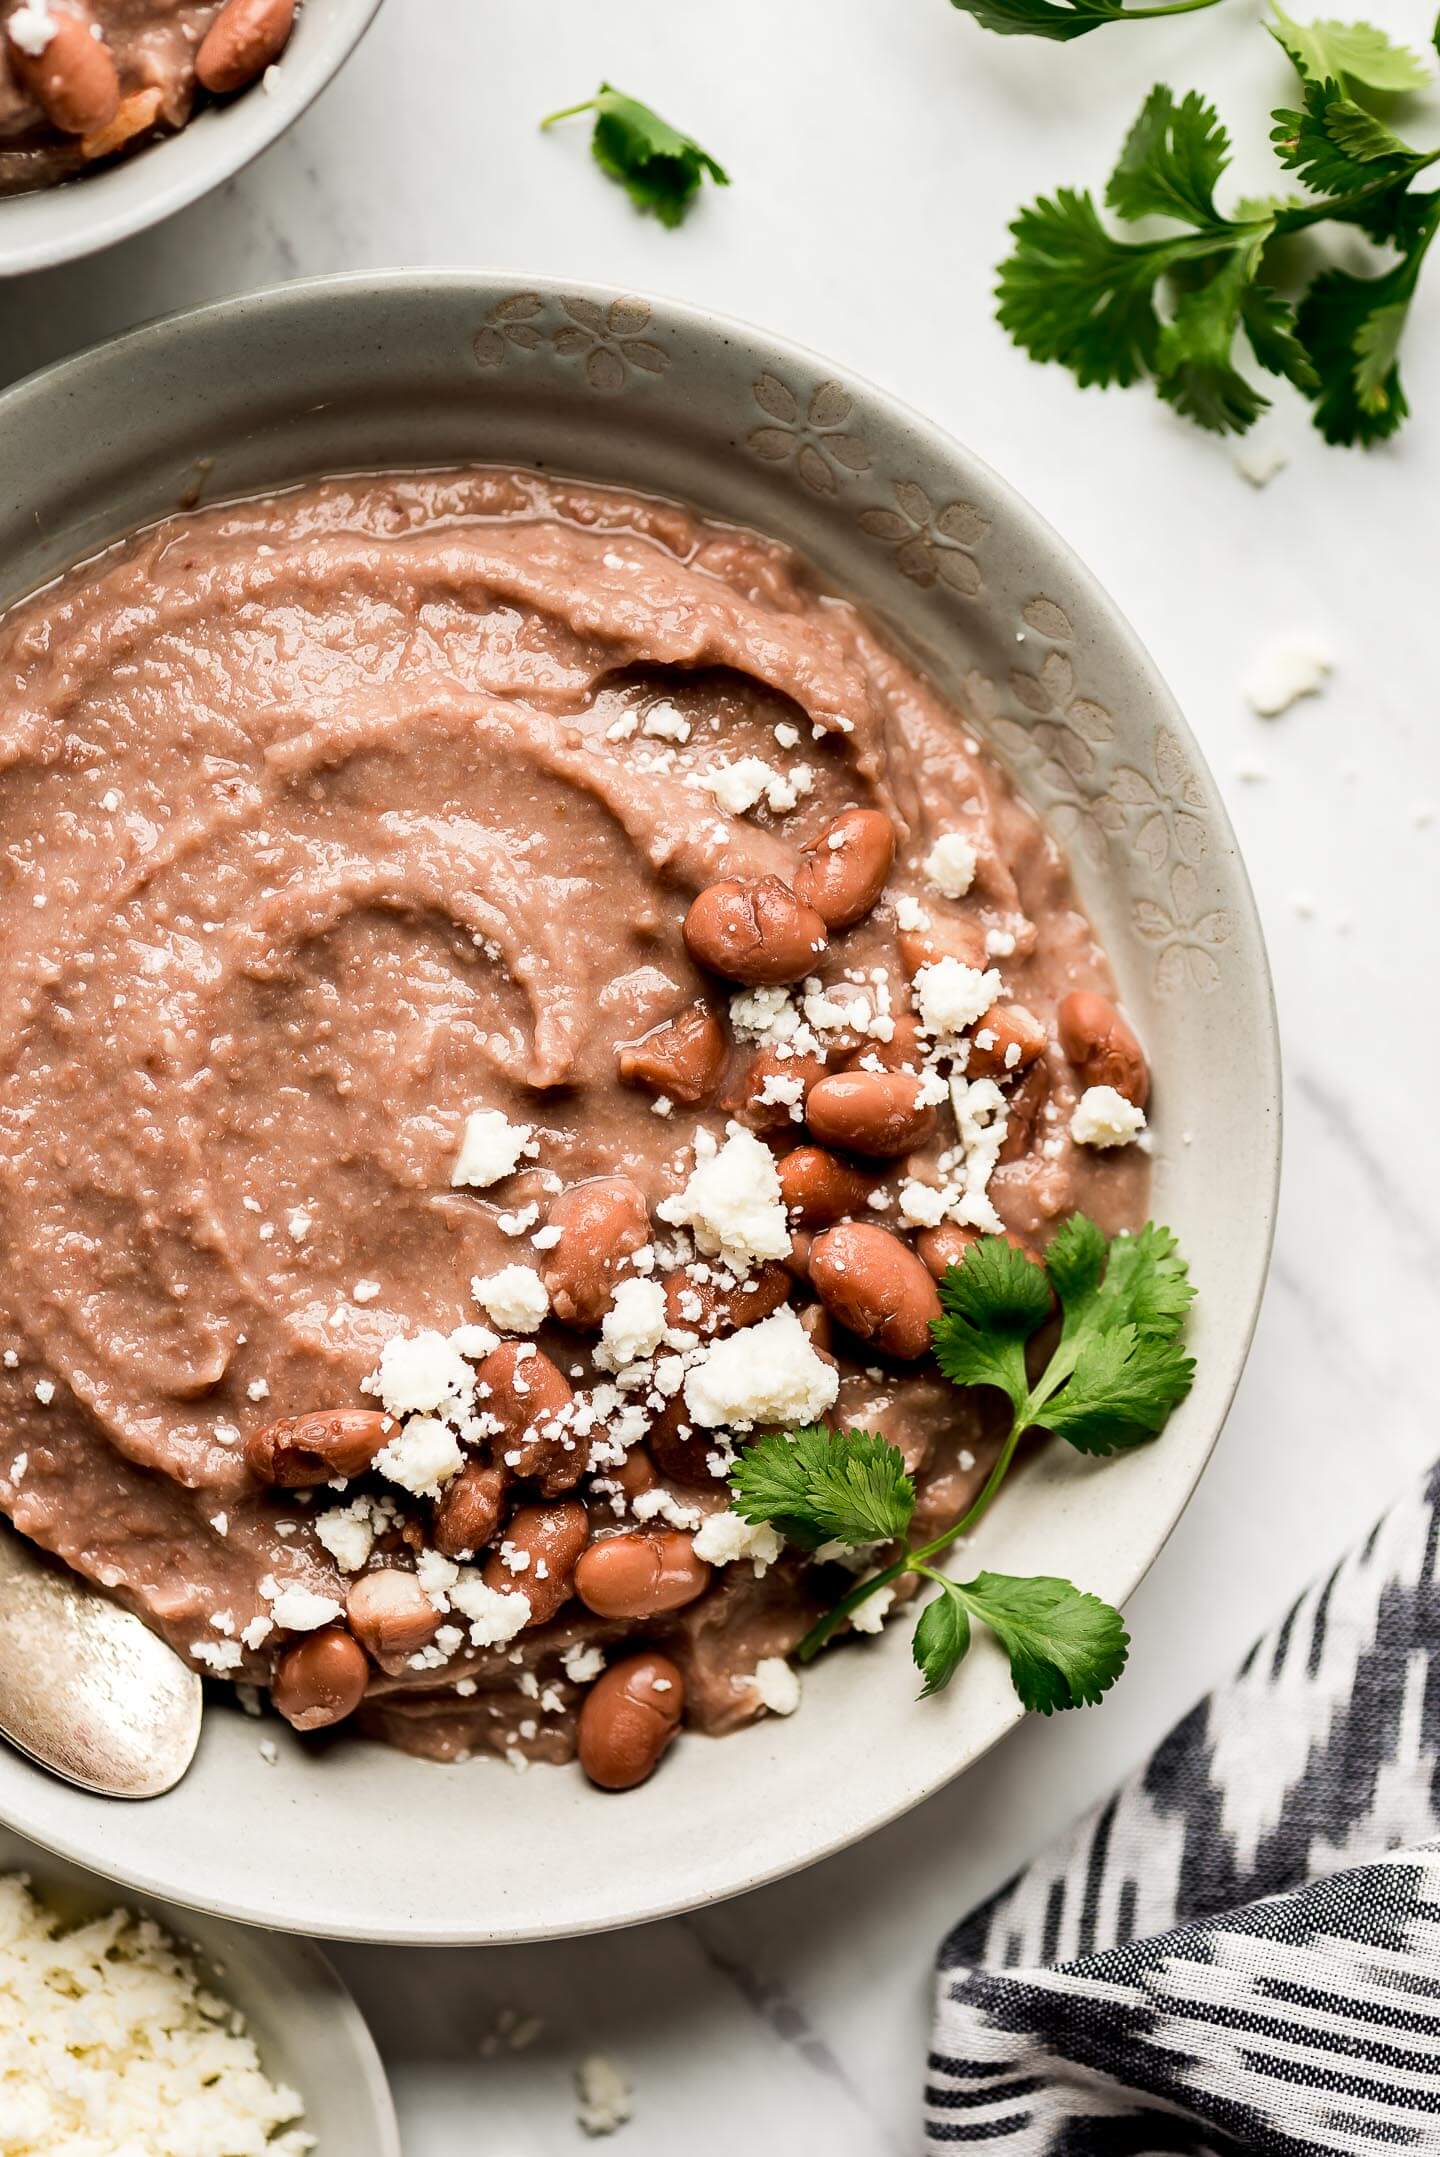 refried beans recipe from scratch